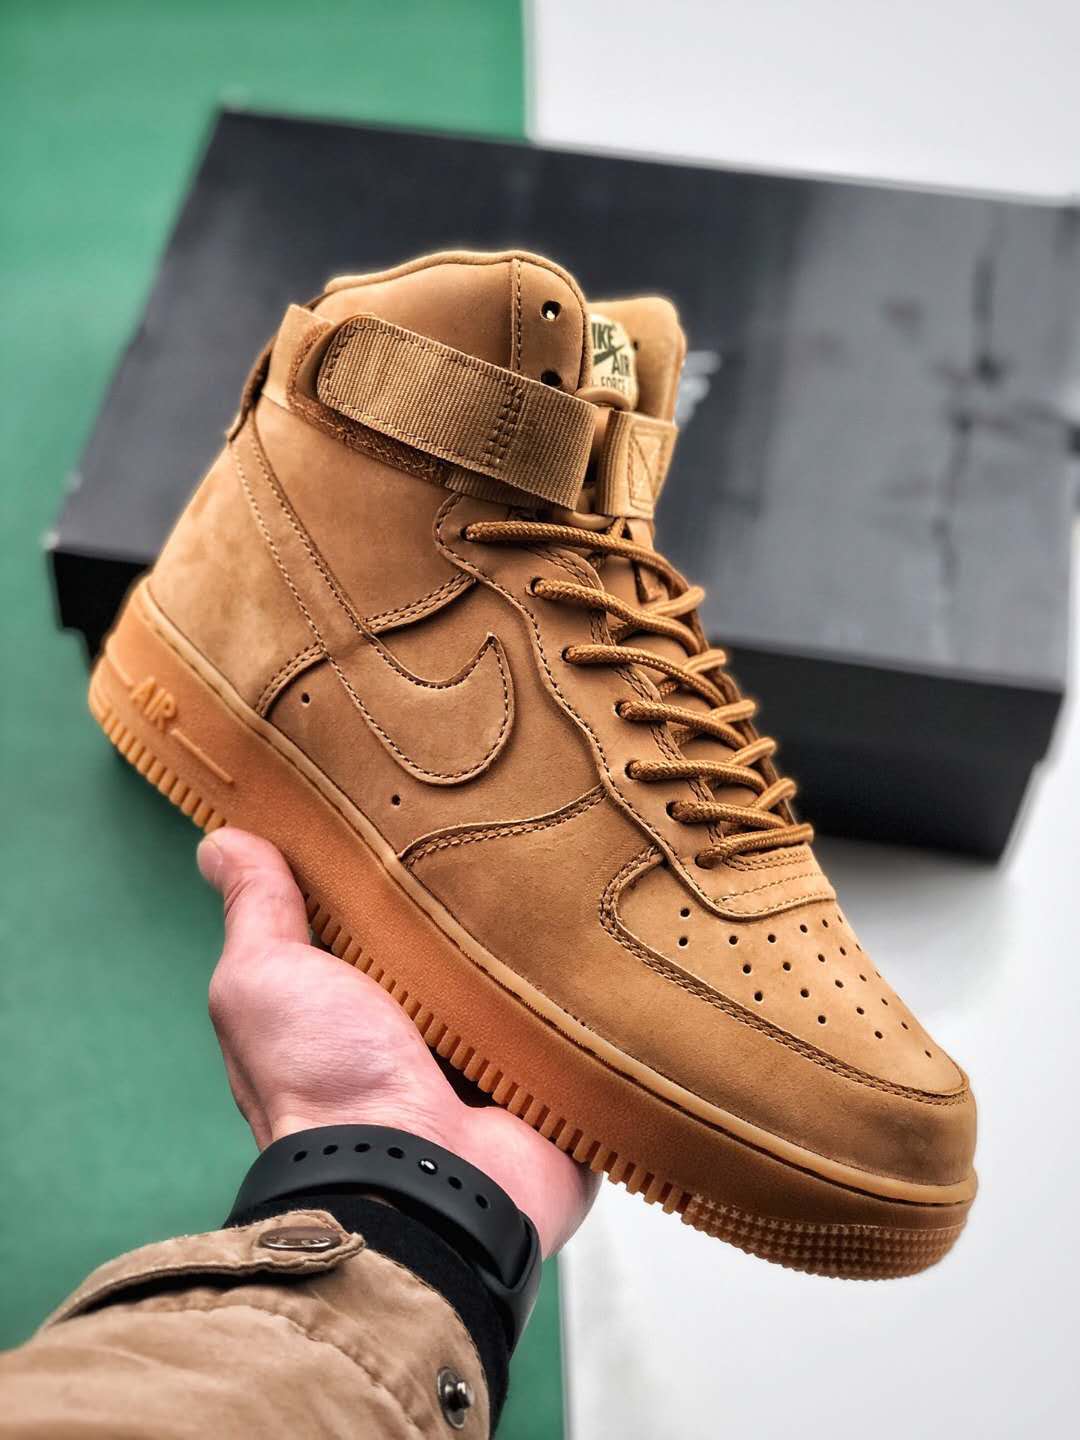 Nike Air Force 1 High Flax - Shop the Iconic Sneaker Now!